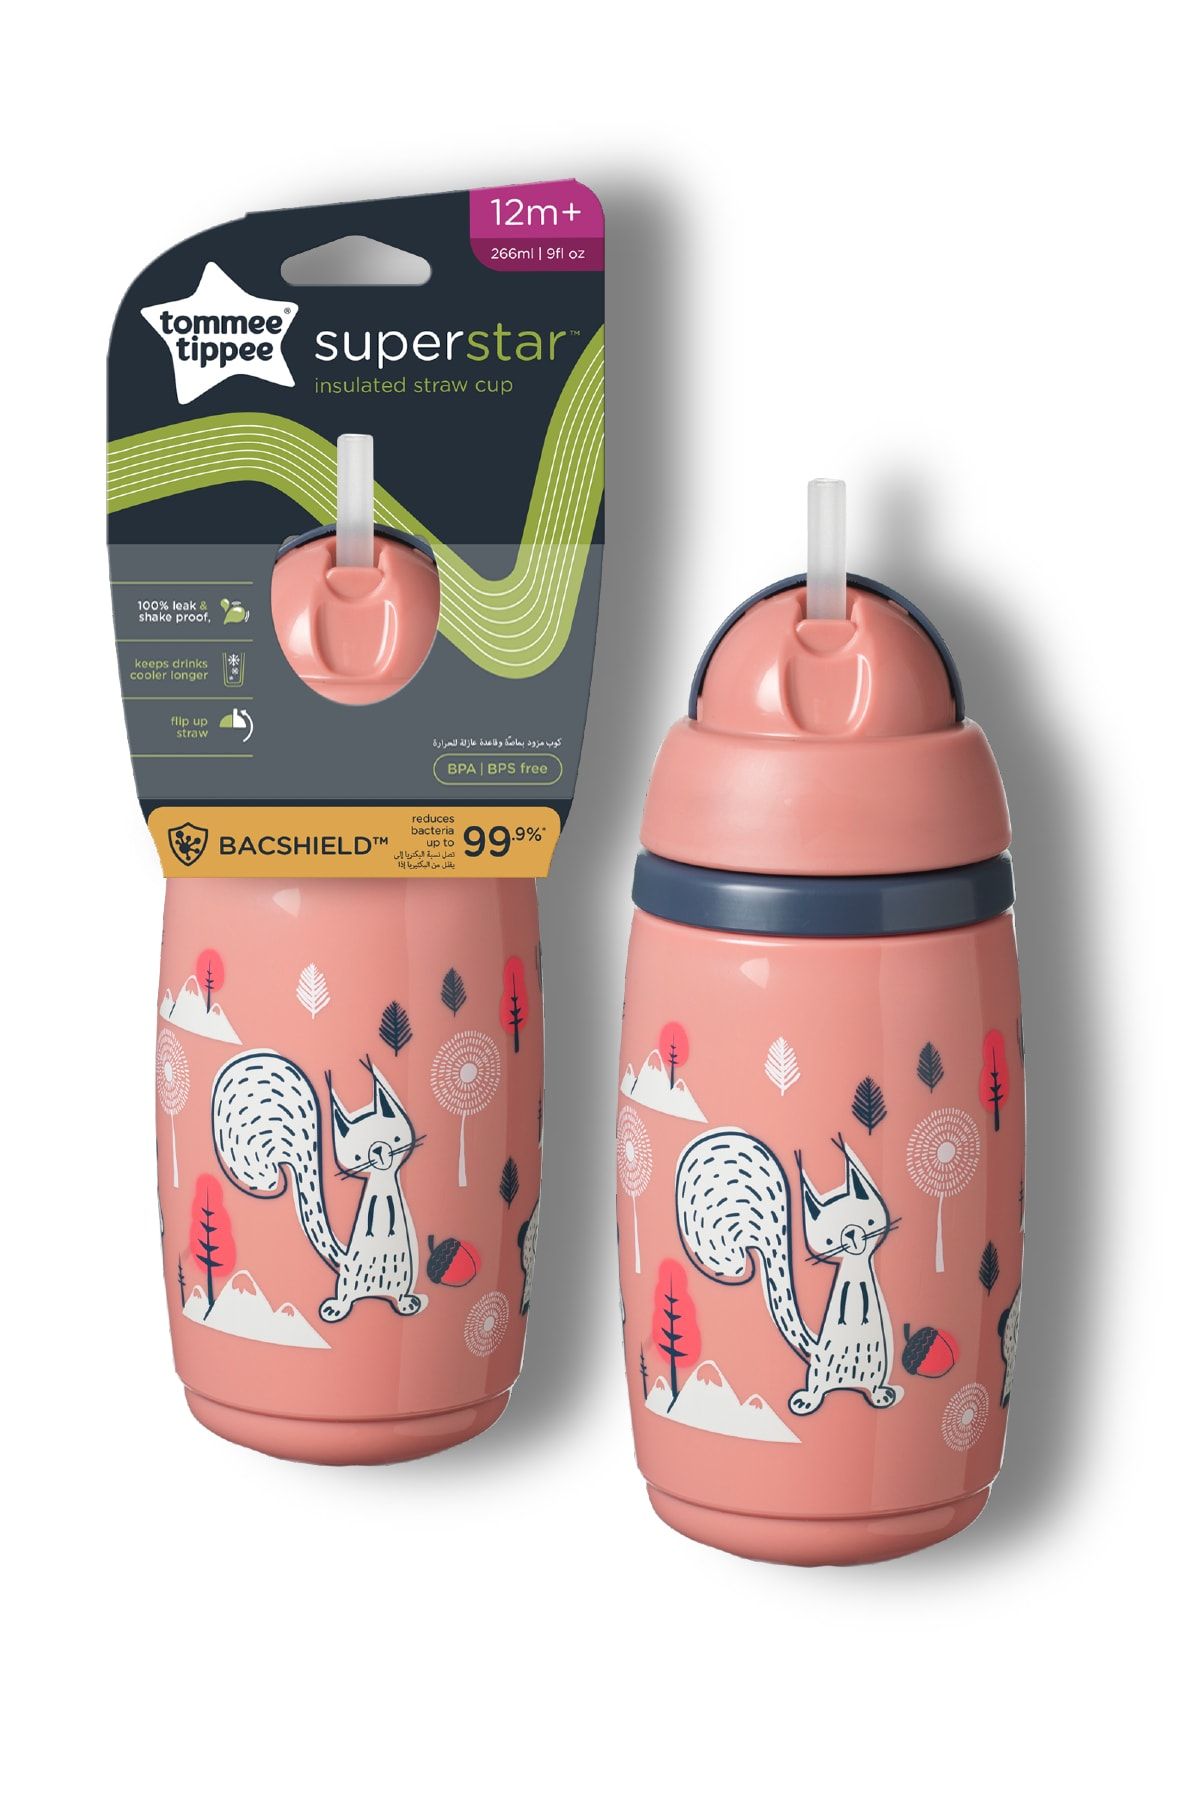 Tommee Tippee Insulated Straw Cup 266ml (12m+)